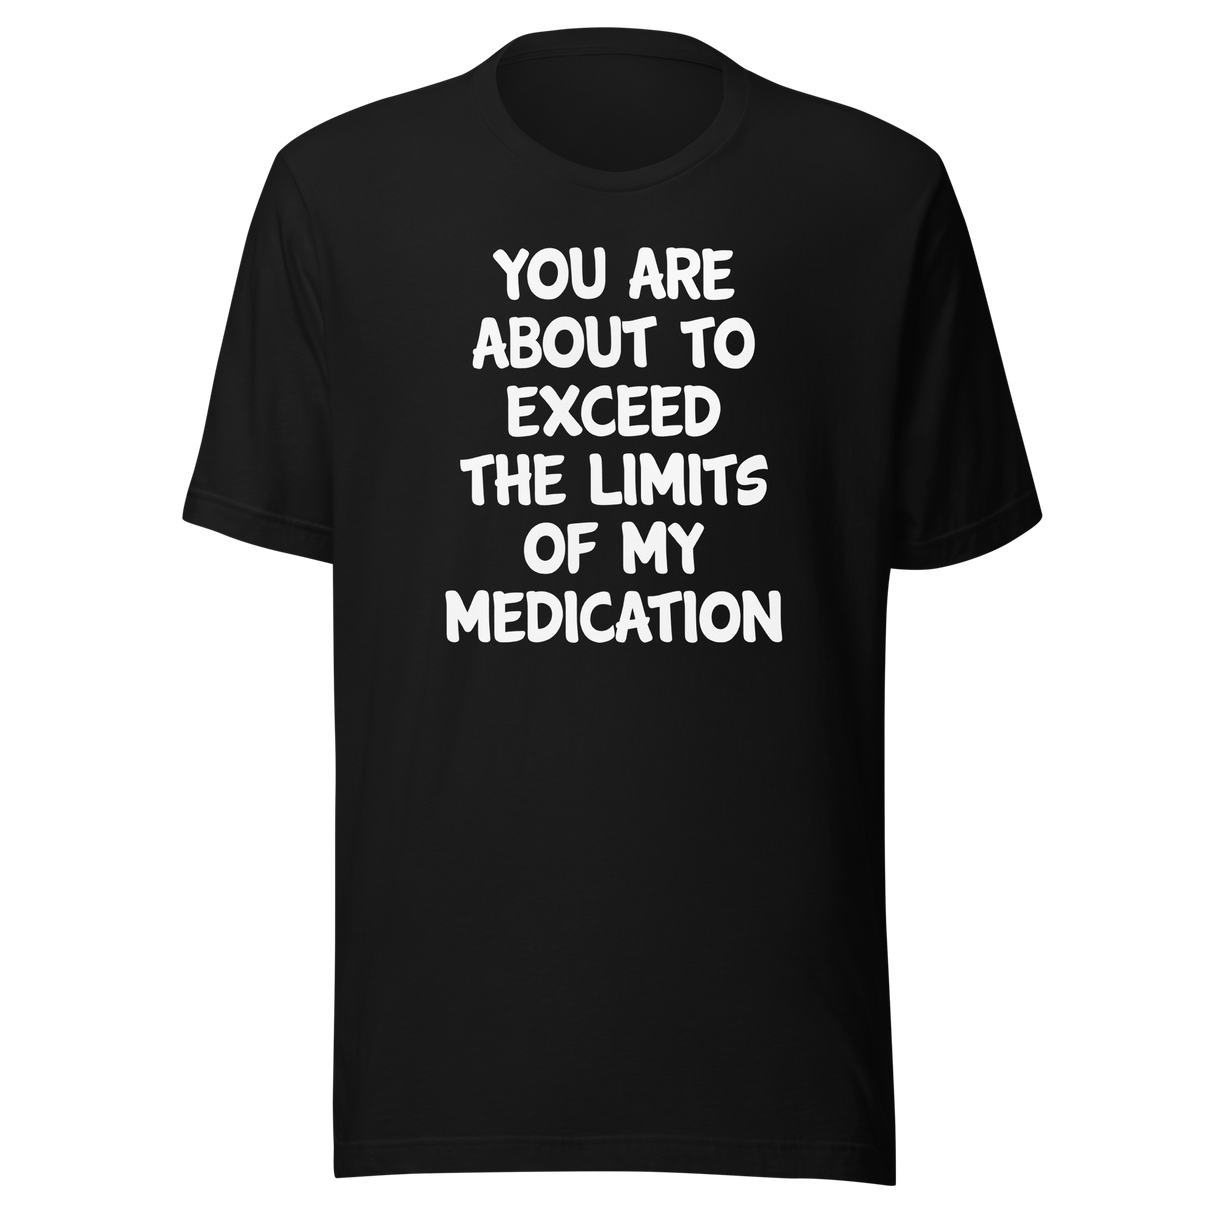 you-are-about-to-exceed-the-limits-of-my-medication-funny-tee-laughter-t-shirt-humor-tee-comedy-t-shirt-hilarious-tee-1#color_black